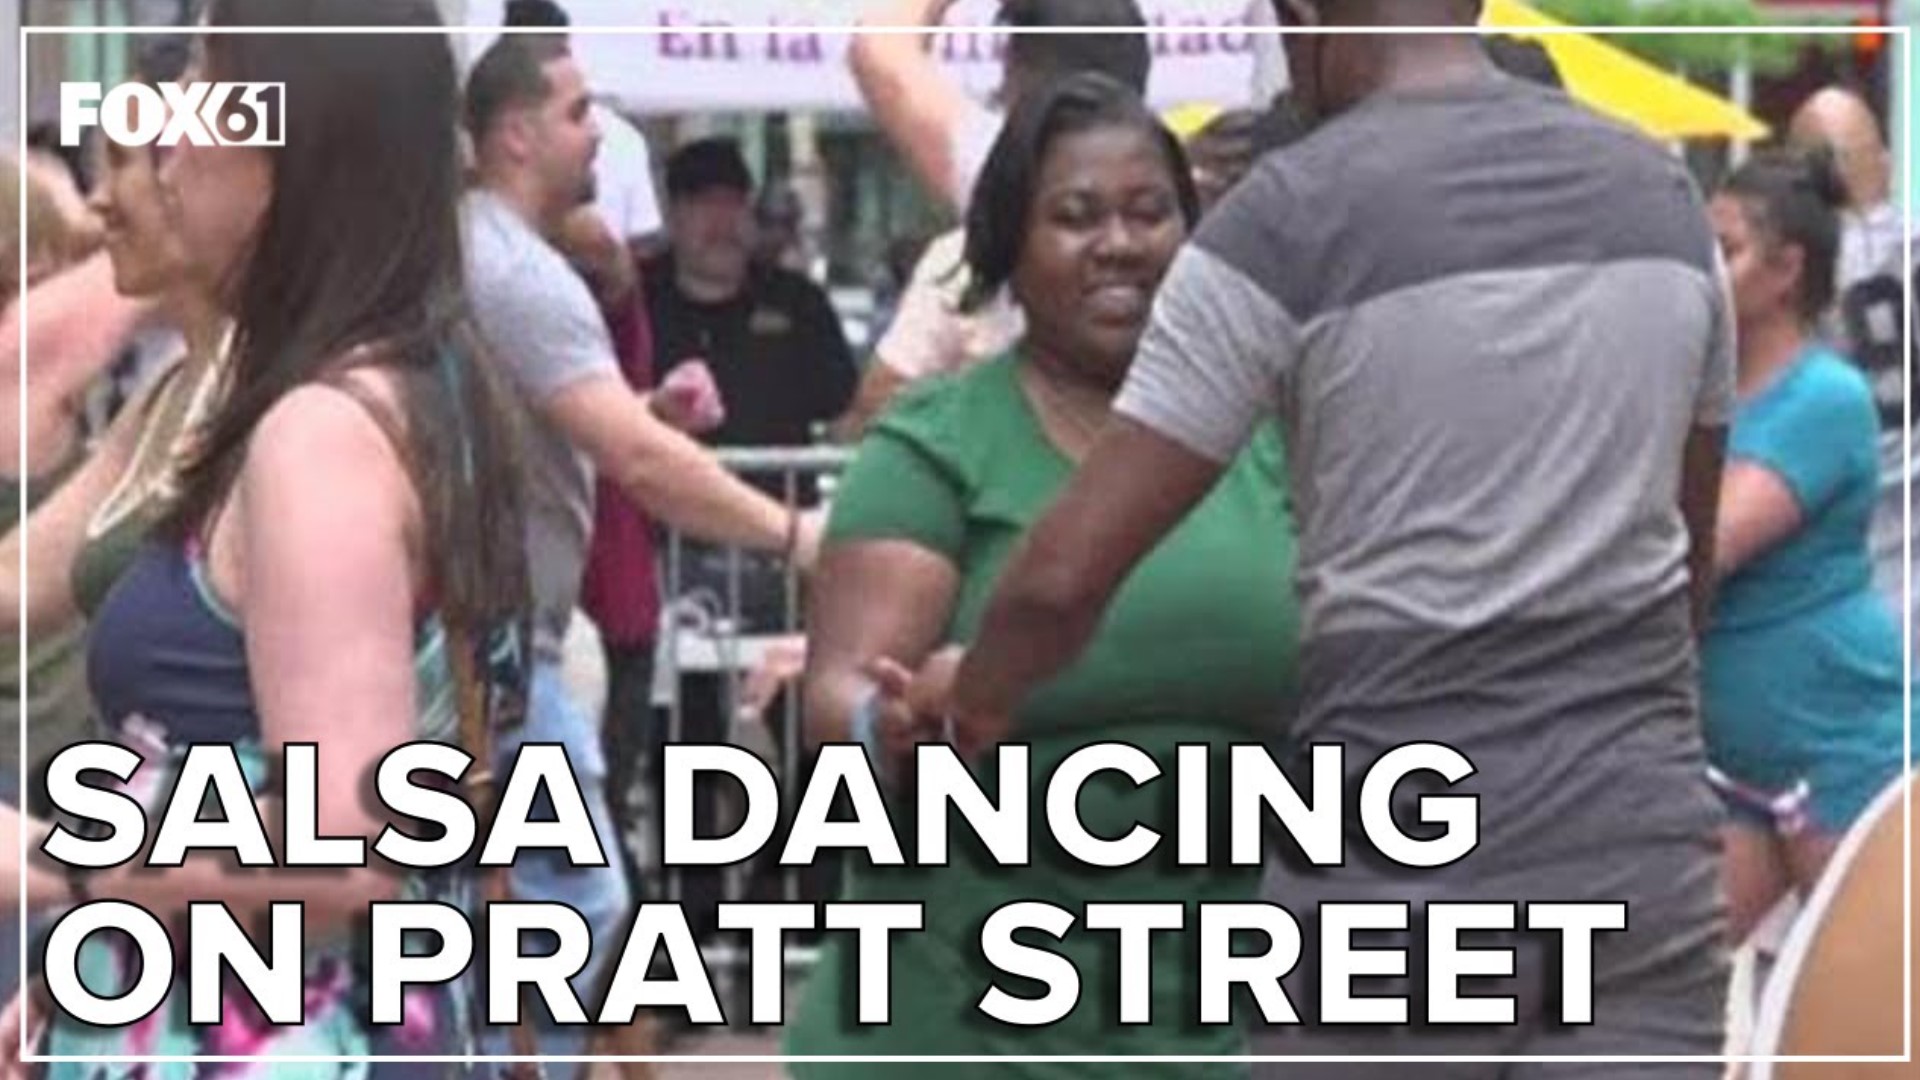 This is the first time the Salsa dancing event happened downtown since the pandemic.